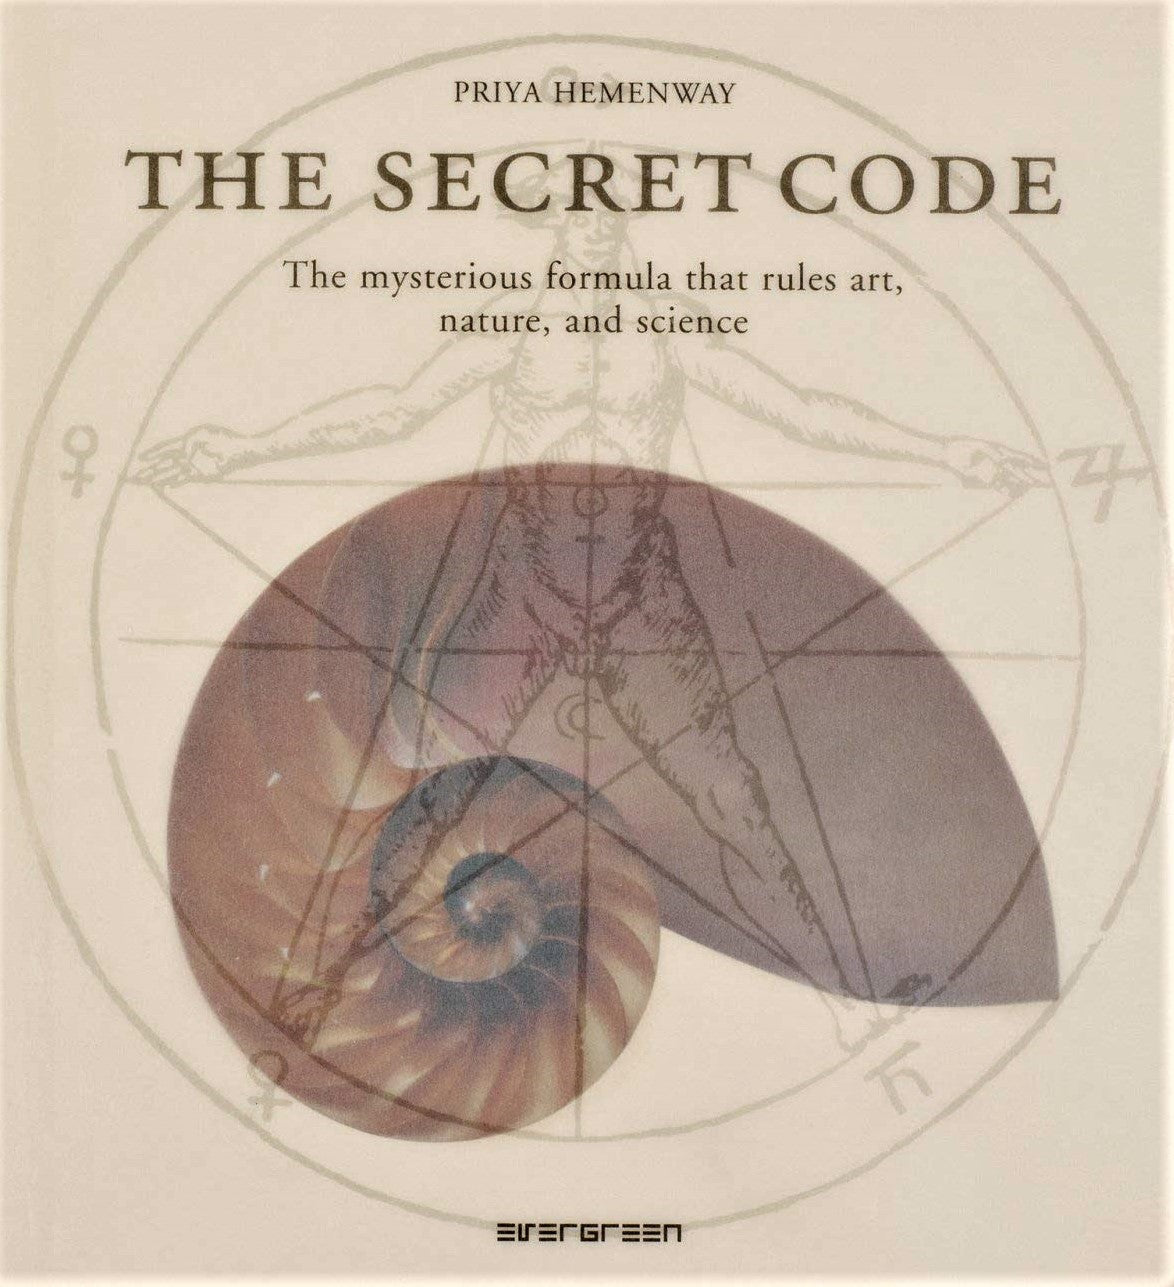 Livre ISBN 3836507102 The secret code : The mysterious formula that rules art, nature, and science (Priya Hemenway)